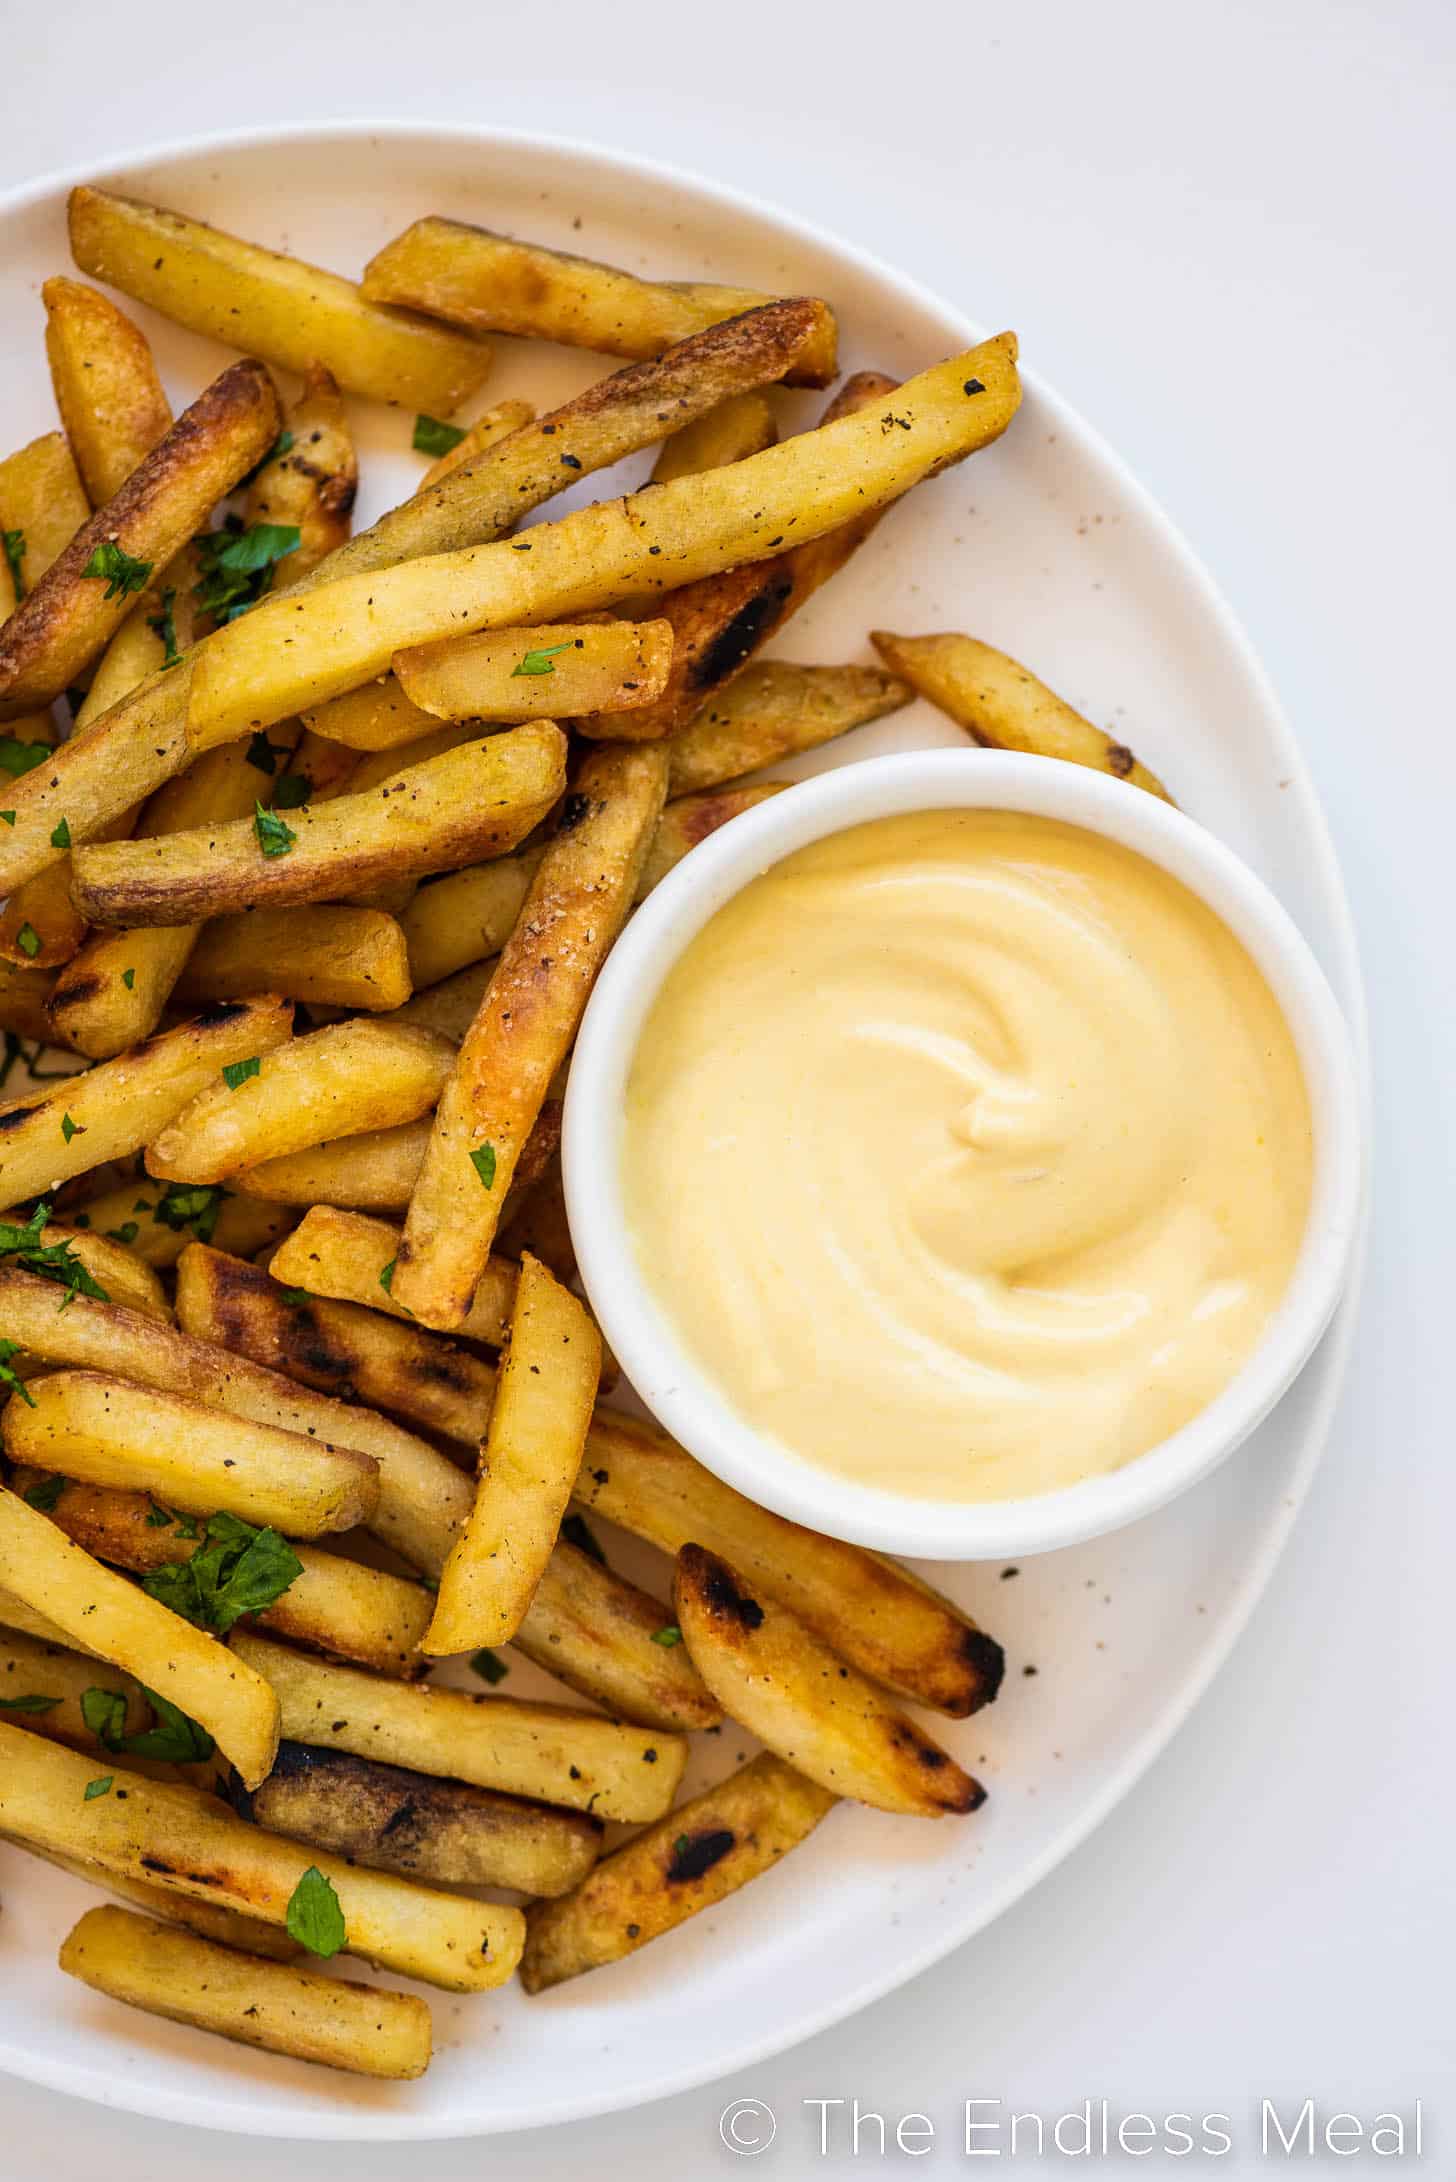 Mayo Mustard Sauce on a plate with fries